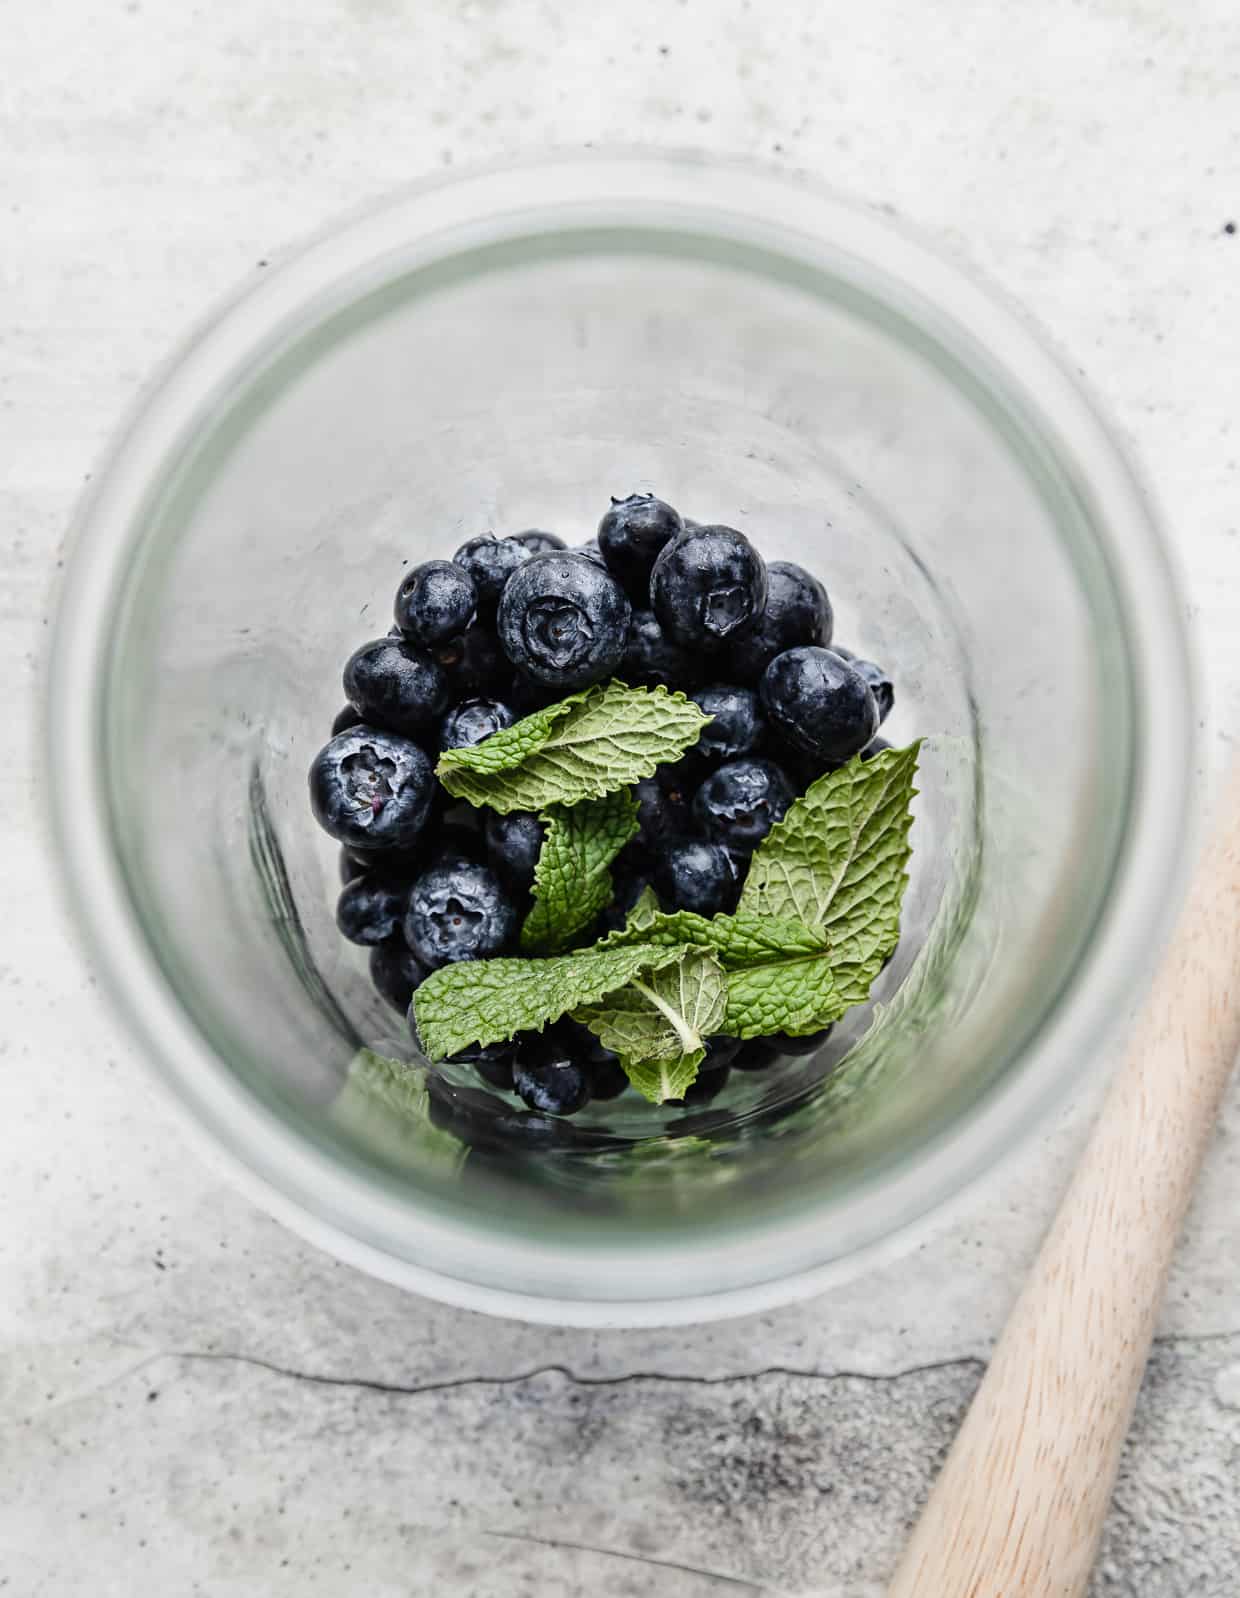 A glass jar with a handful of fresh blueberries and mint leaves in the bottom, in preparation to make a blueberry mocktail.